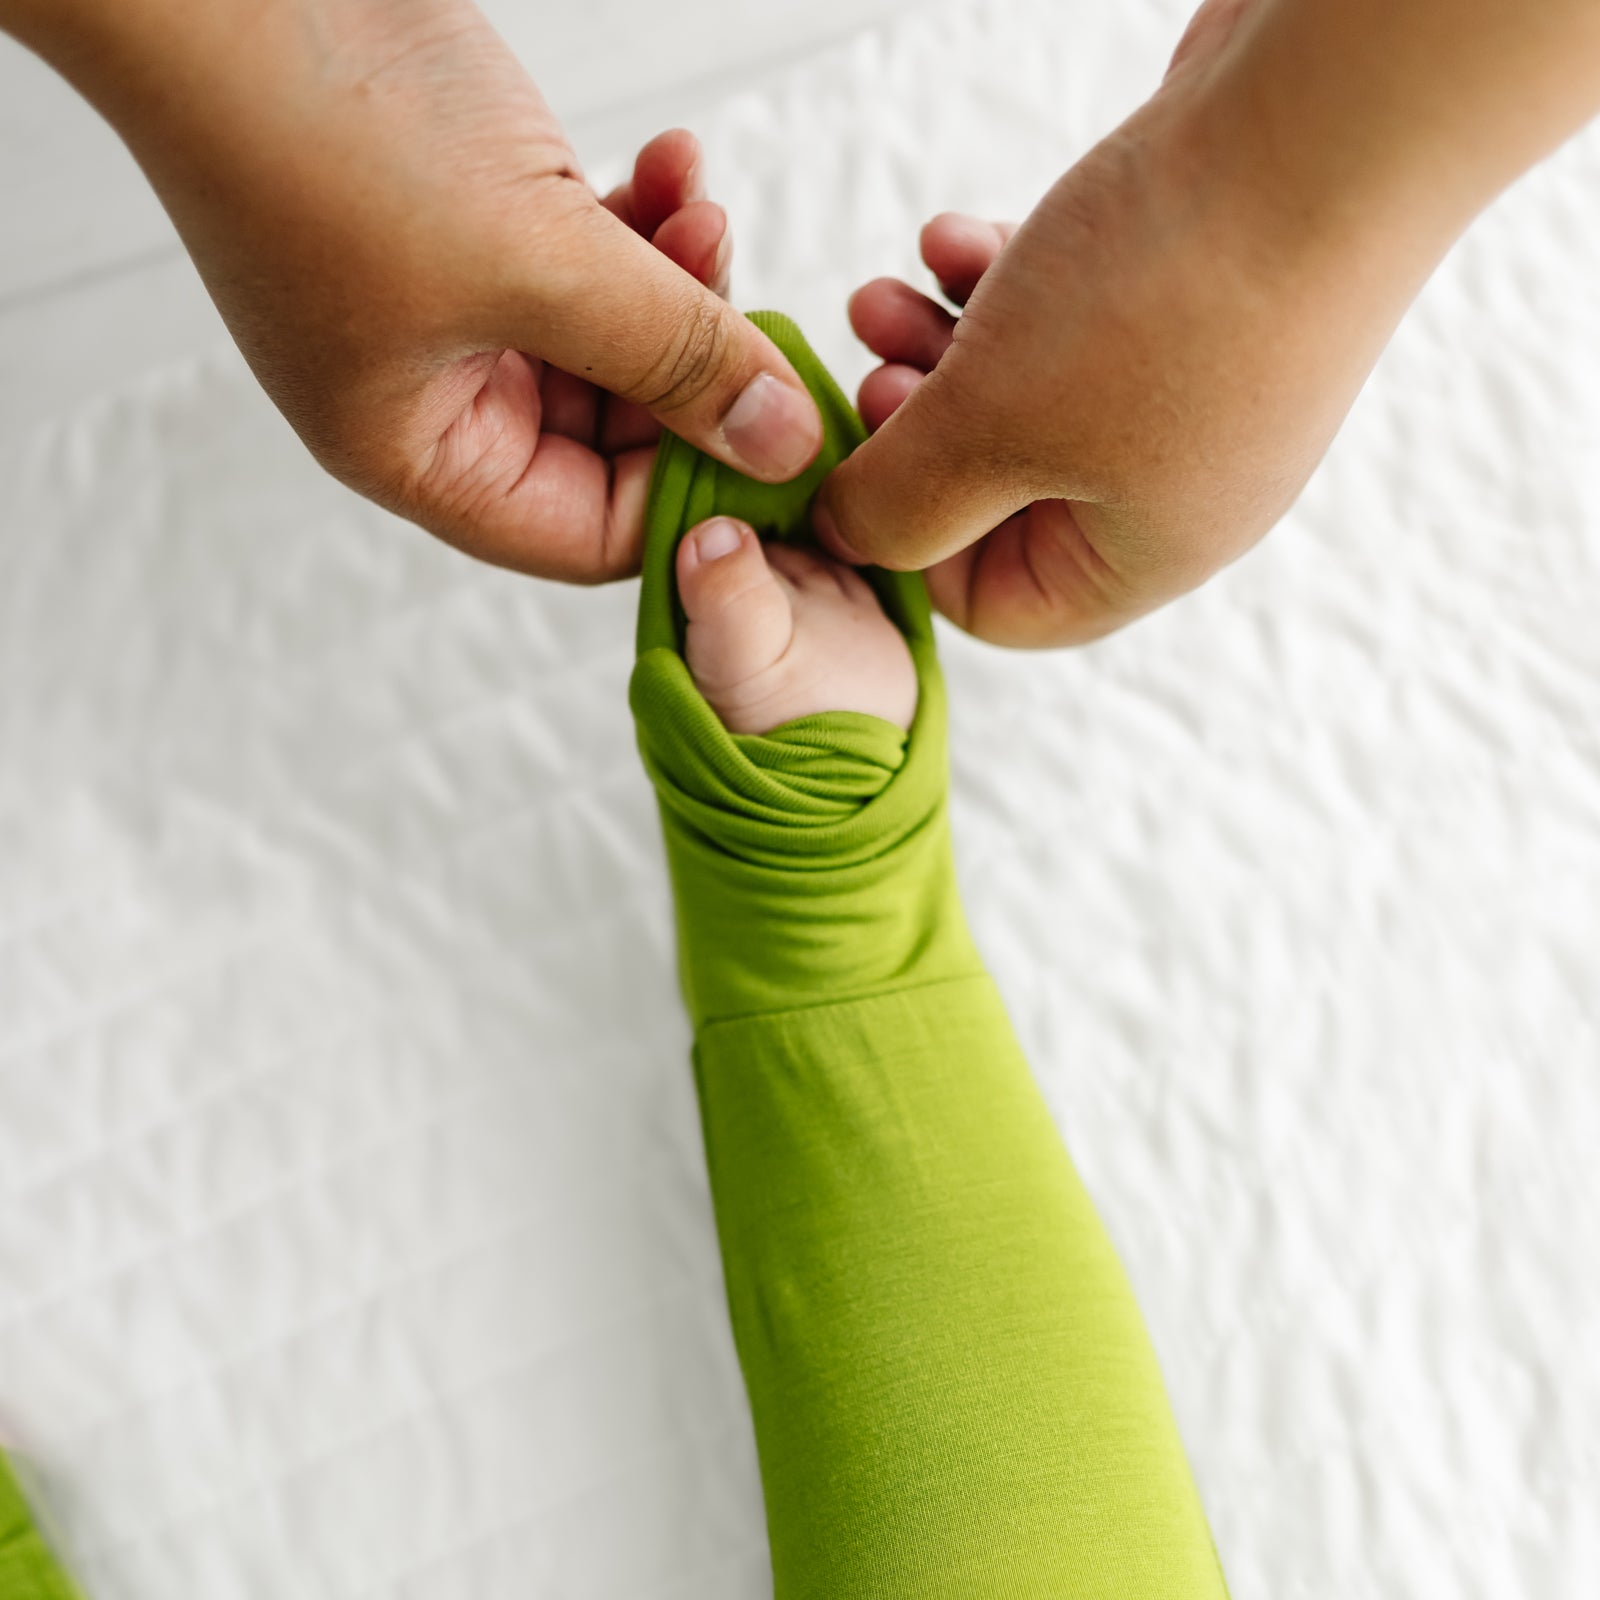 Mother folding over a foot cuff on their child wearing an Avocado zippy